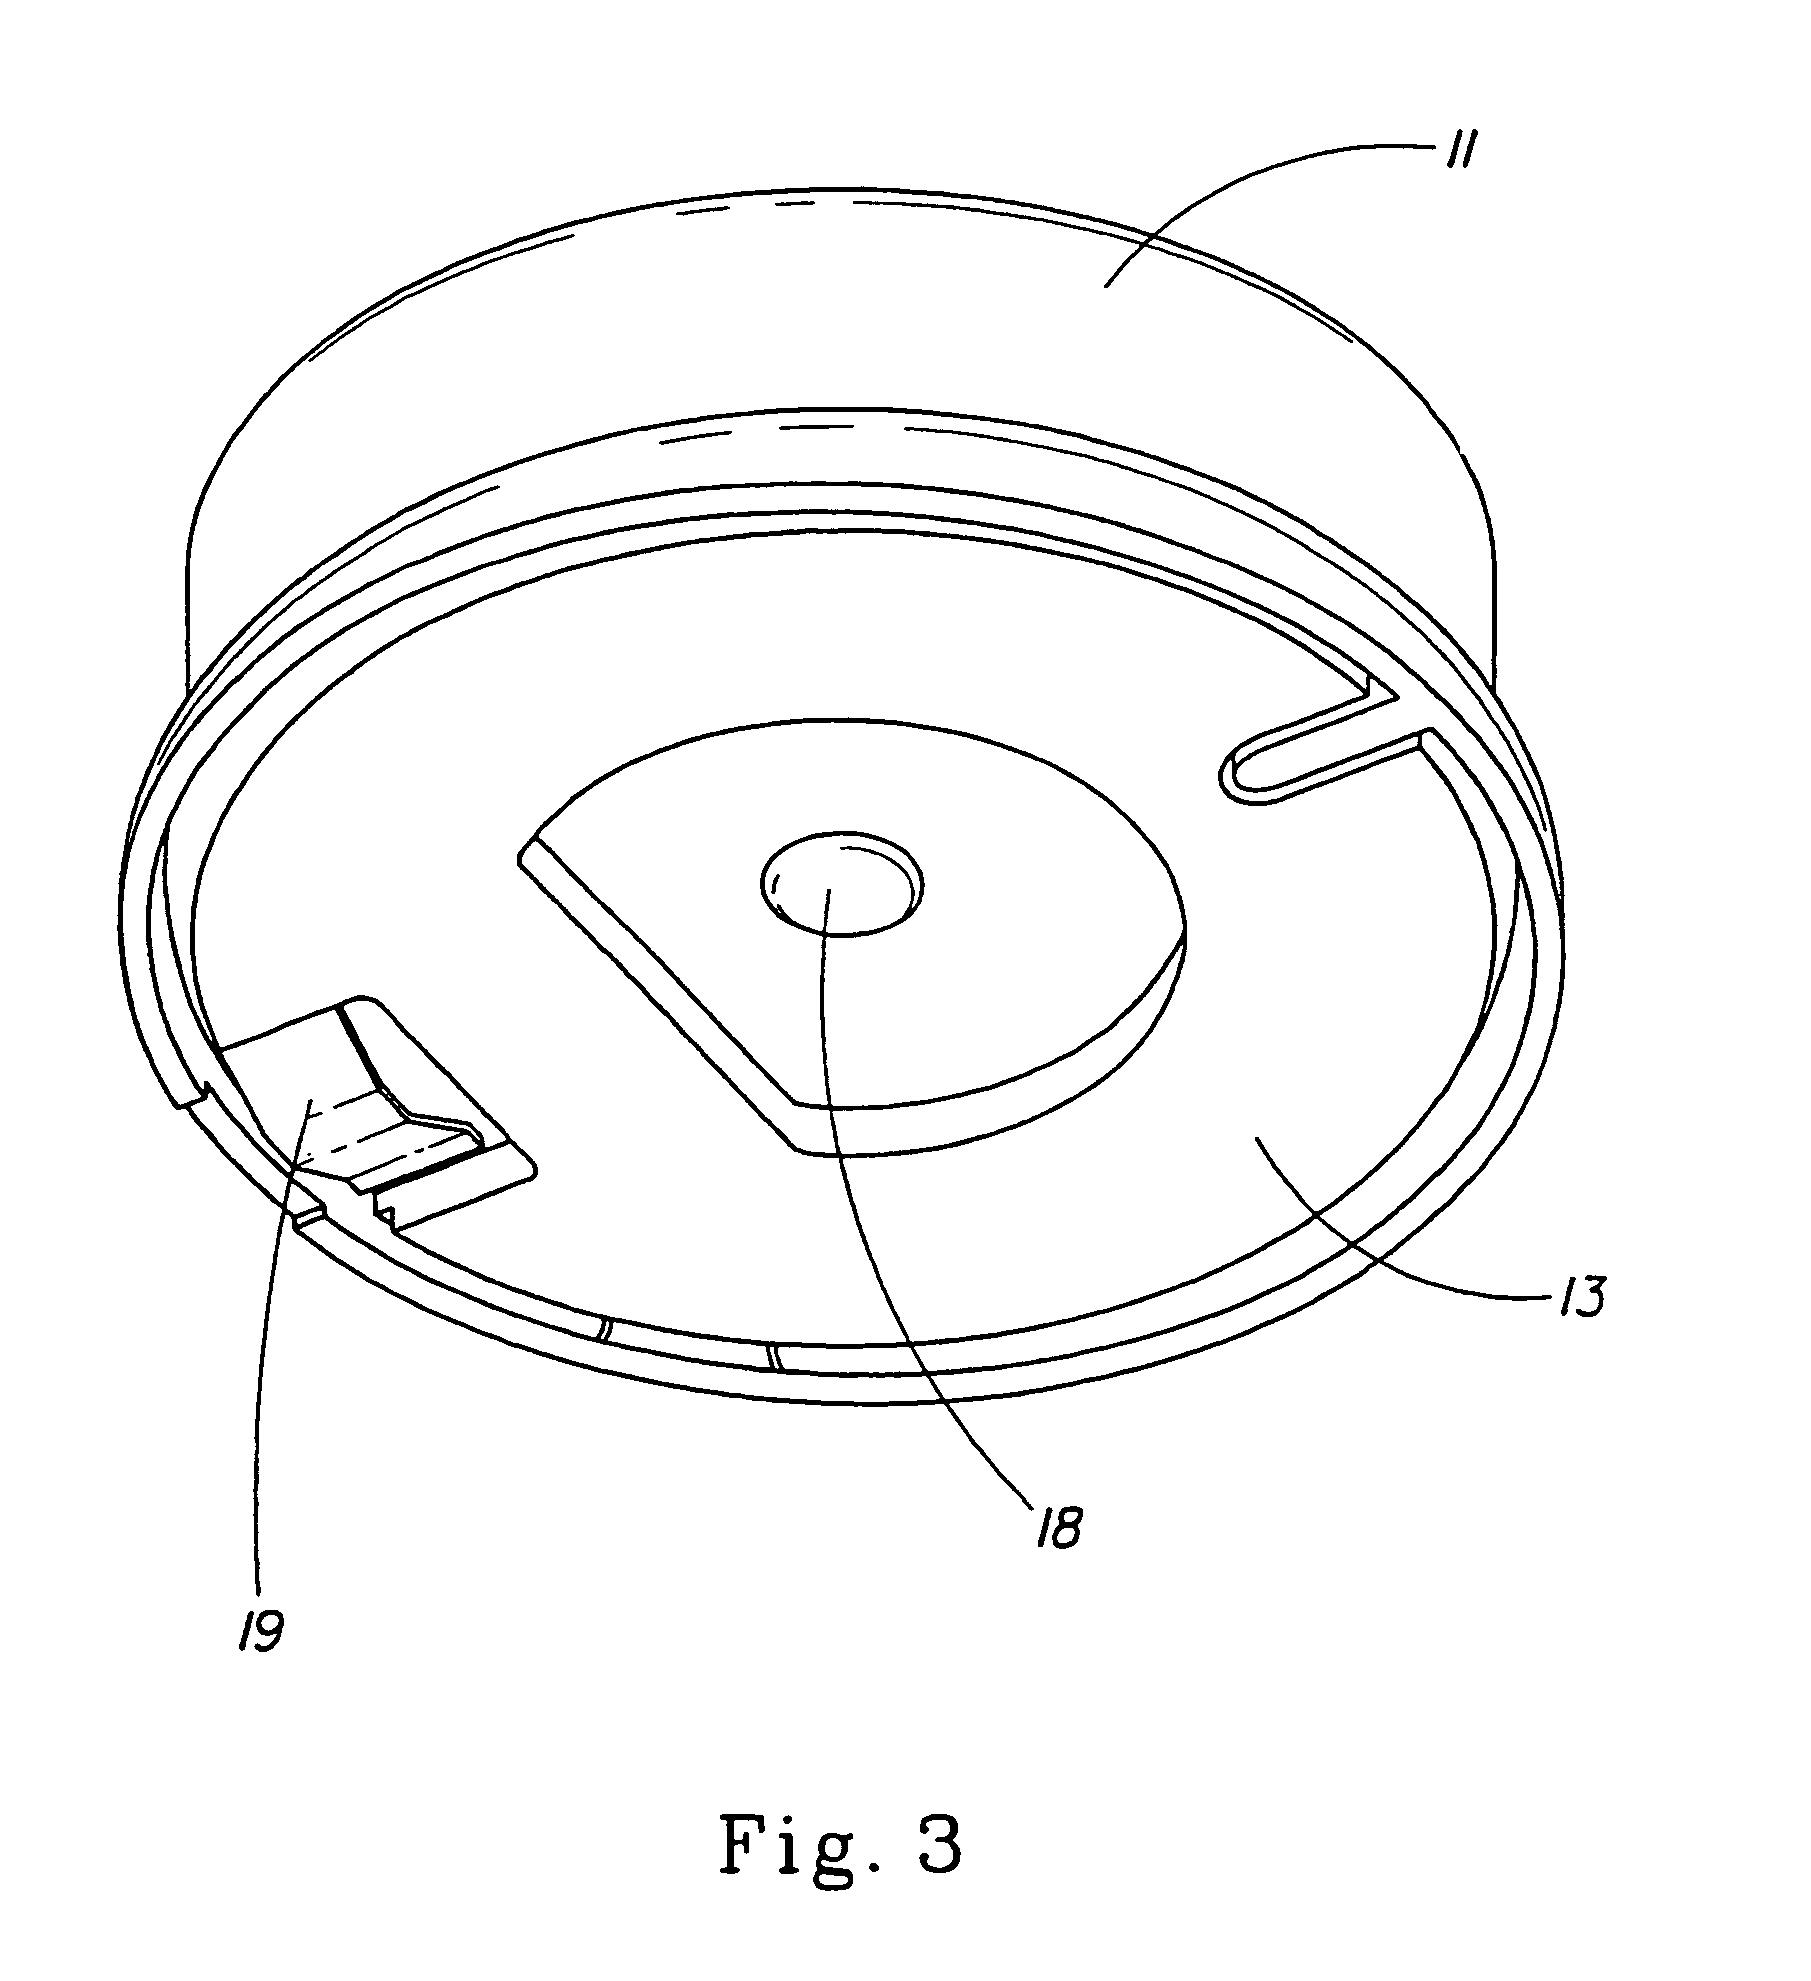 Battery having a housing for electronic circuitry